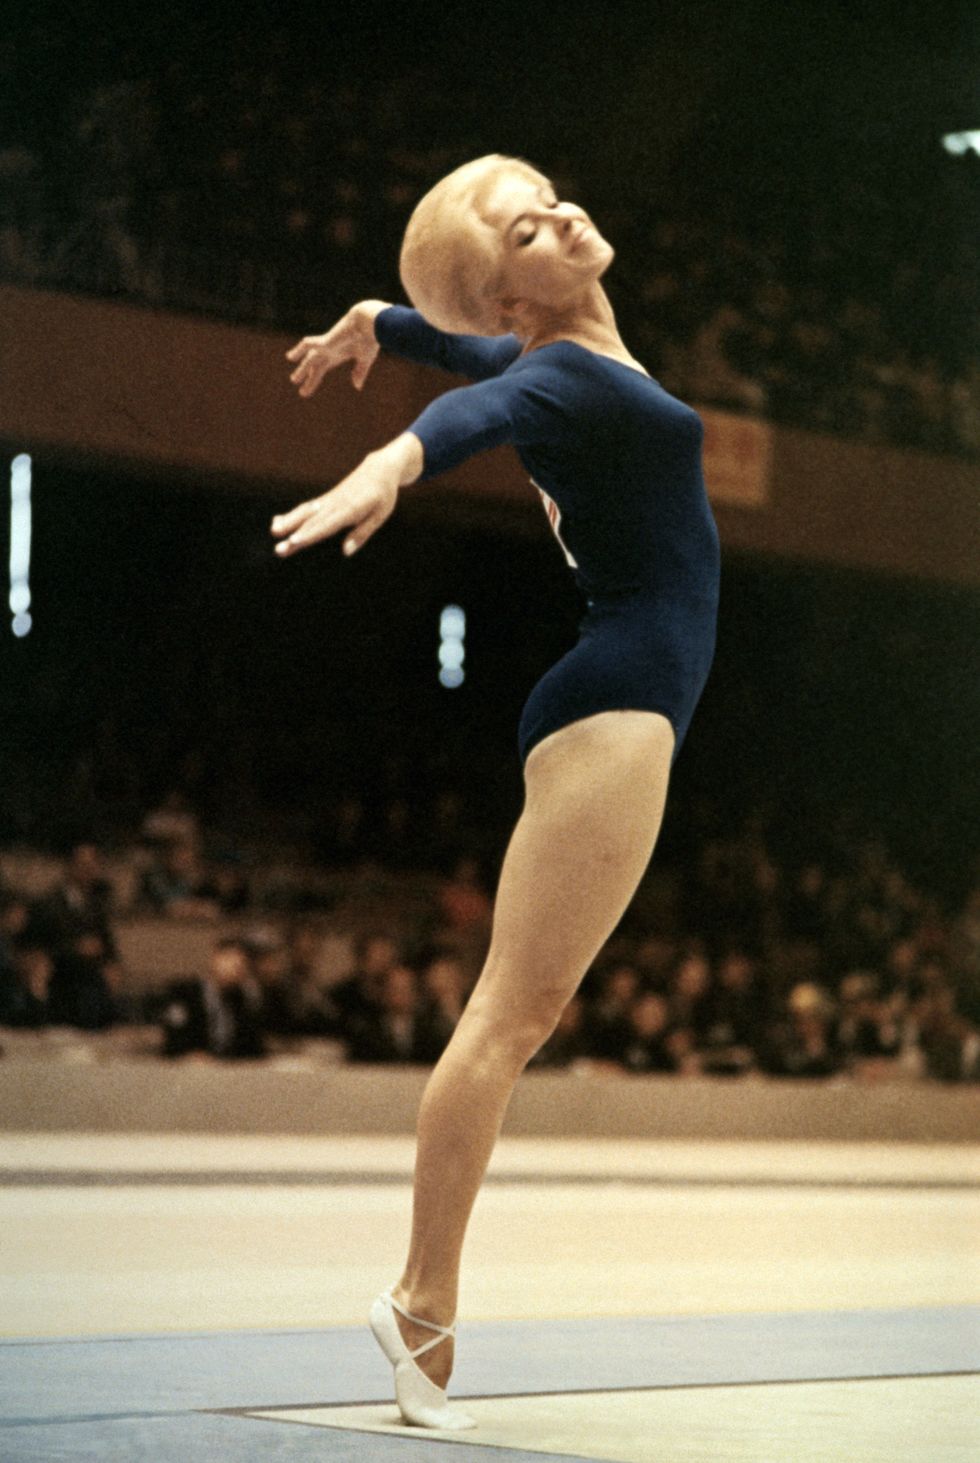 <p>The '60s of course brought us big hair in the form of bouffants and beehives, and the gymnastics team of 1964 somehow maintained that volume through their routines. This feat deserved a medal in its own right, but the team (competing in Tokyo) unfortunately ended up in 8th place all-around. </p>